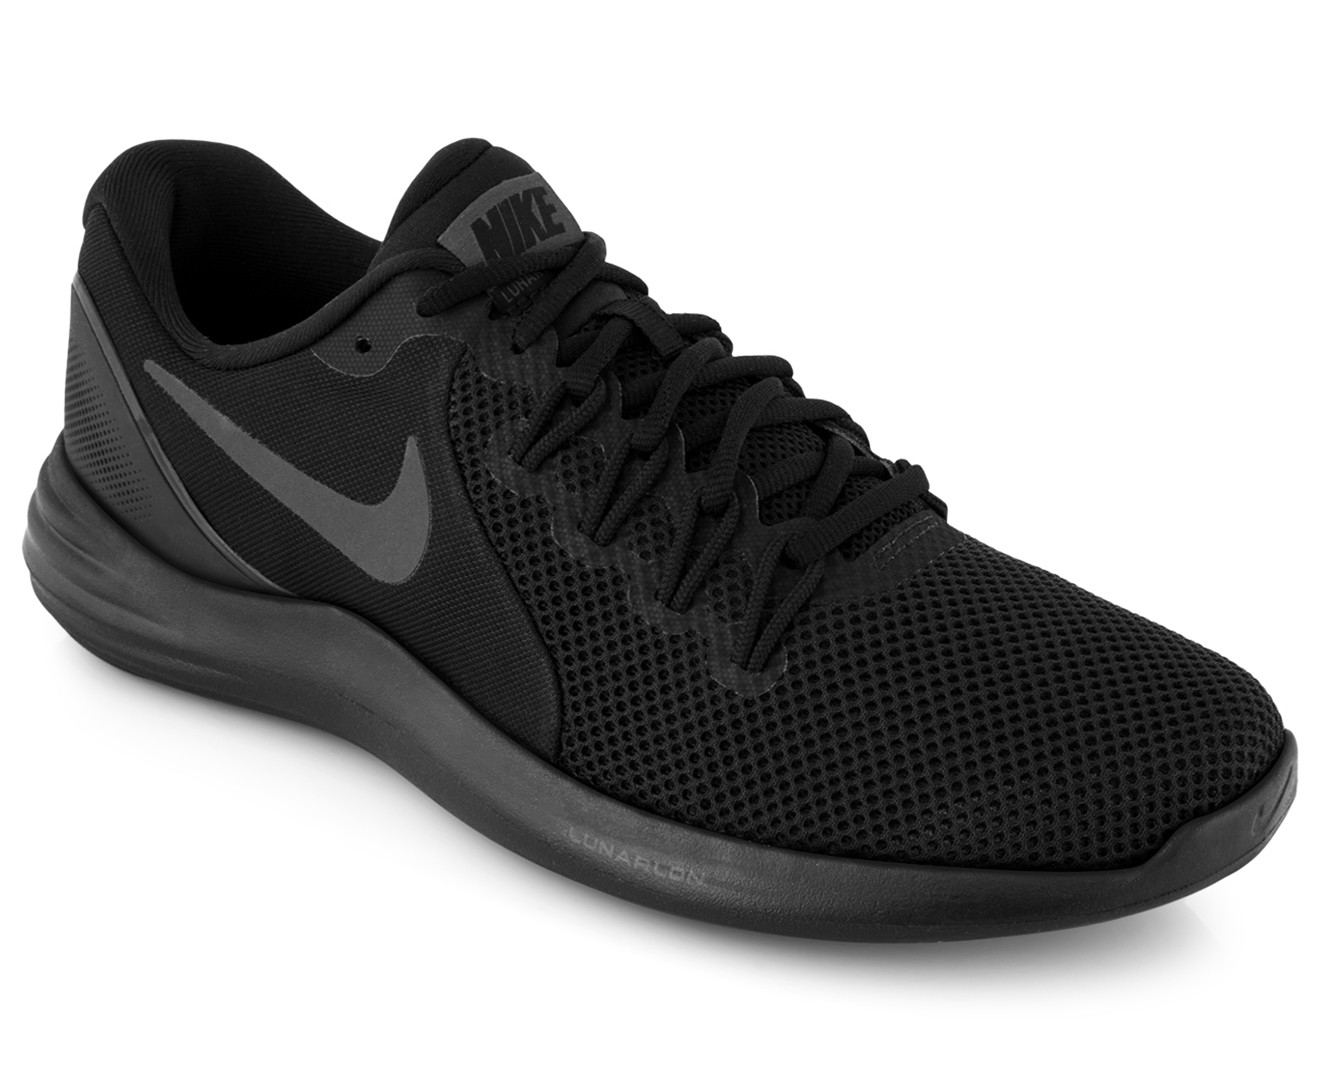 nike shoes nz rebel sport|Free delivery!